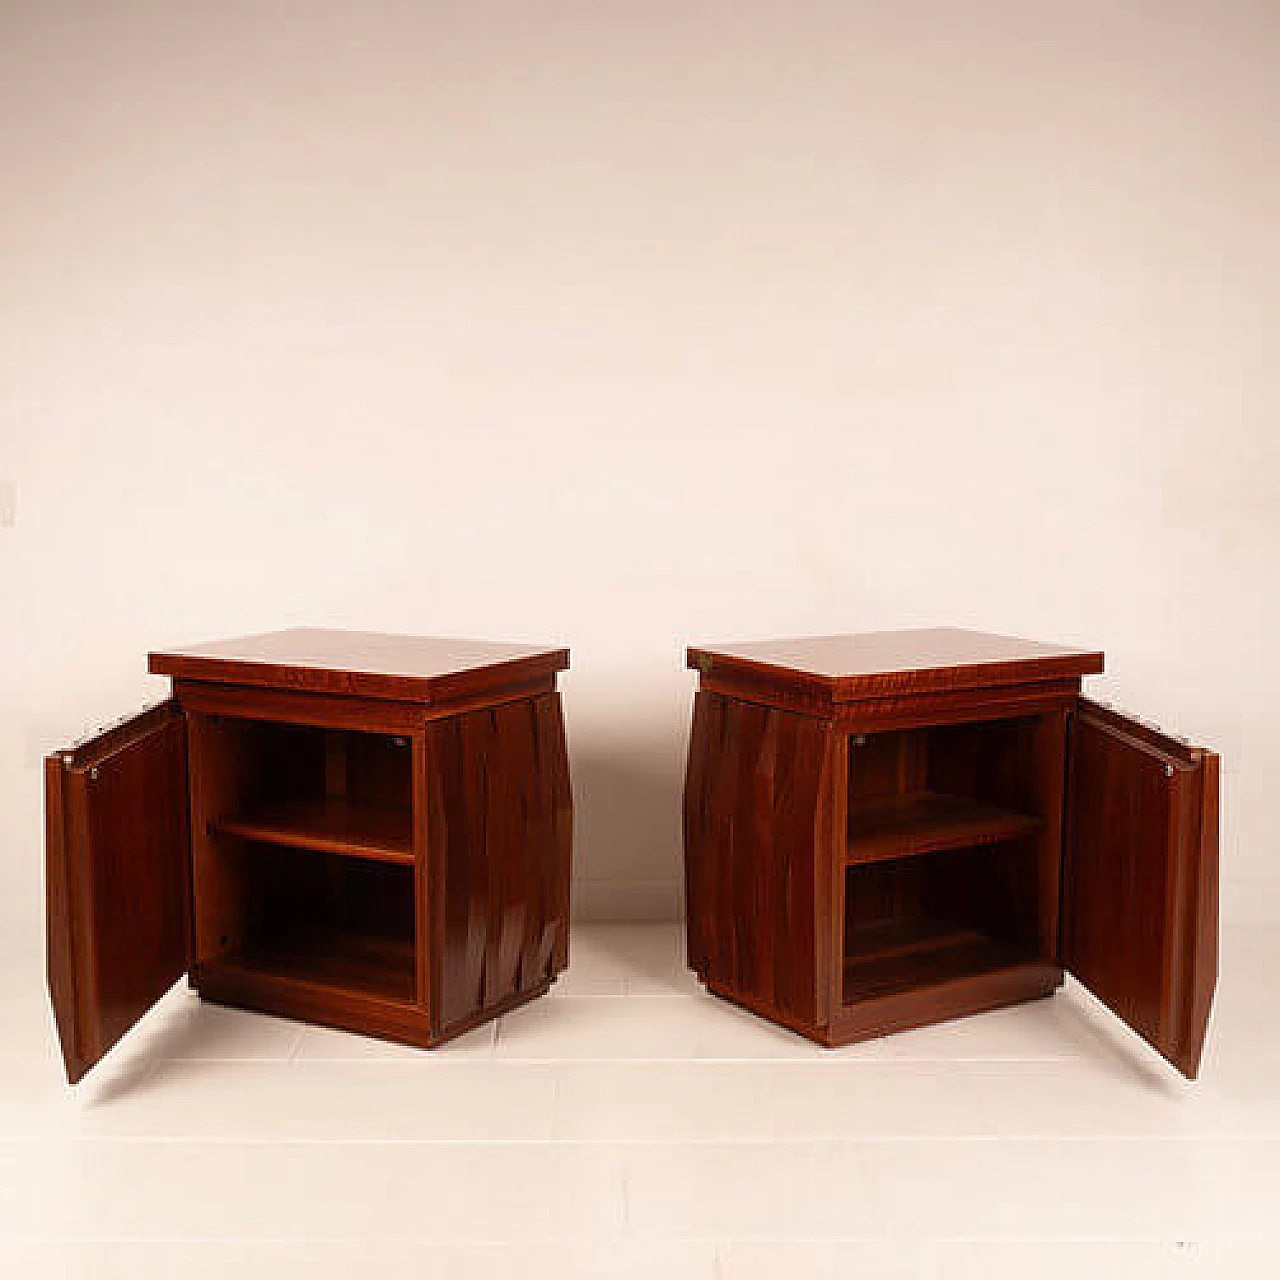 Pair of Barium solid walnut bedside tables by Luciano Frigerio for Frigerio di Desio, 1970s 14